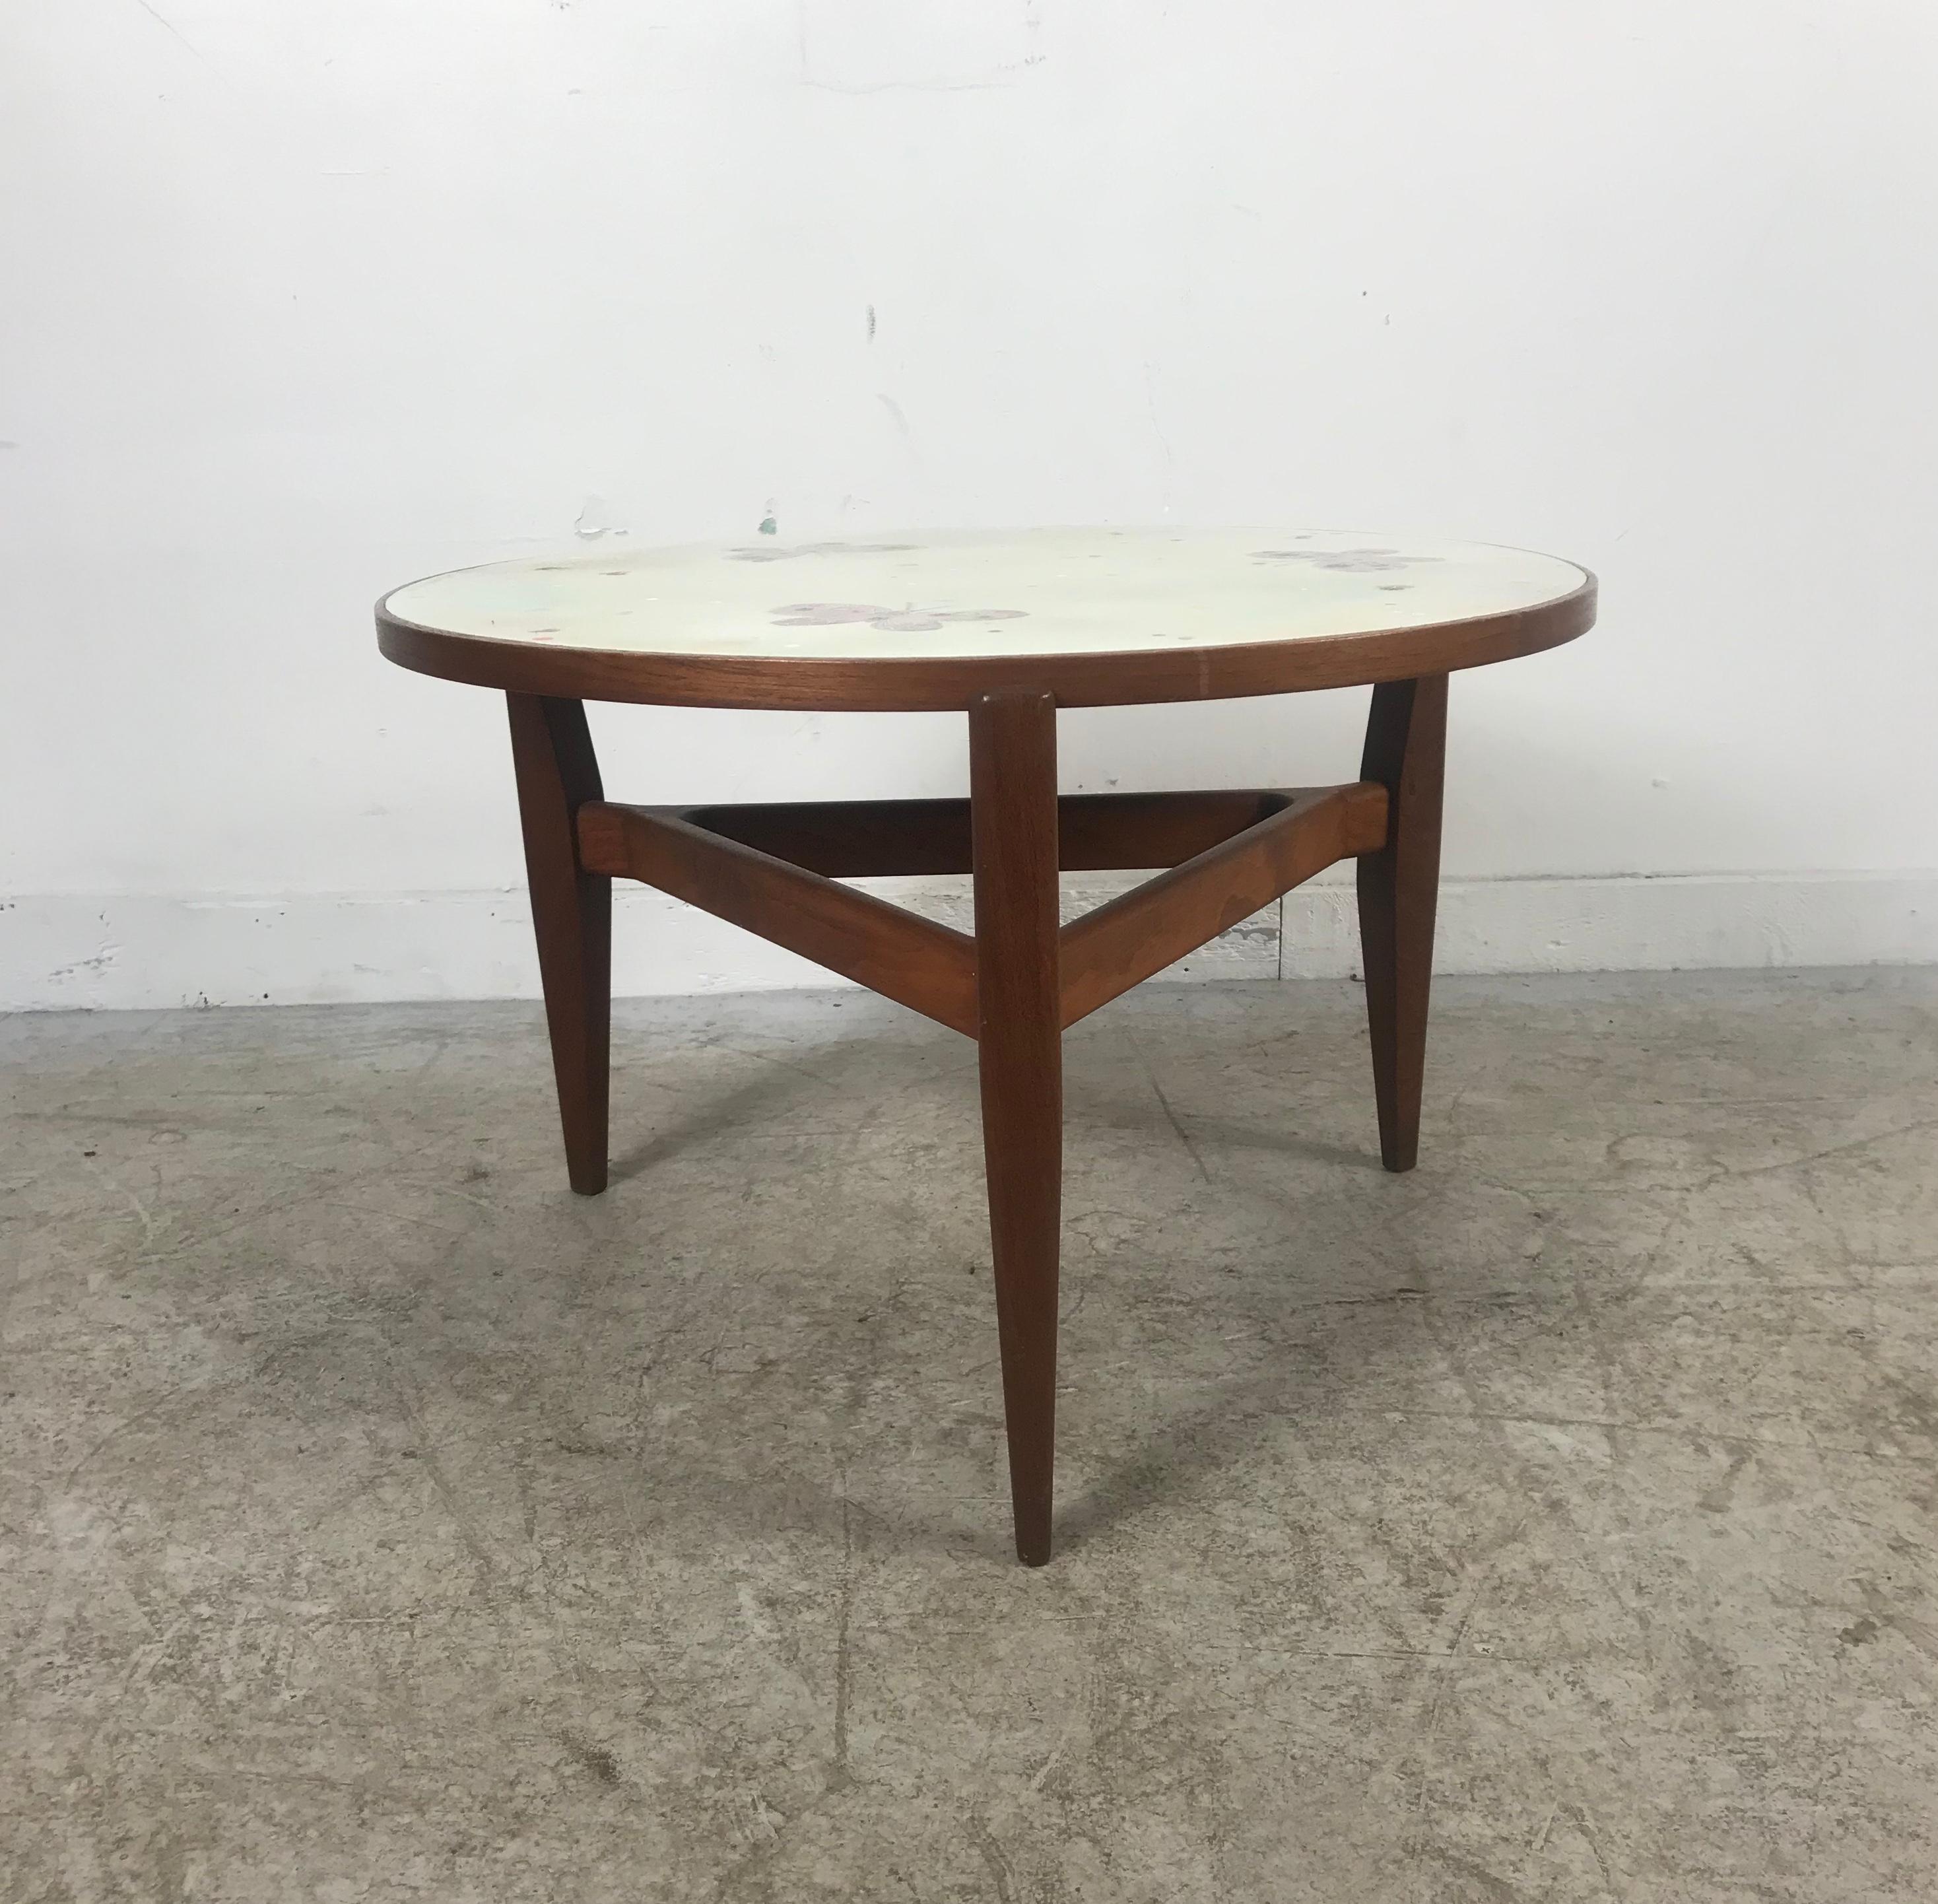 Mid-20th Century Modernist Enamel and Teak Table by Doris Hall, Butterfly and Undersea Motif For Sale